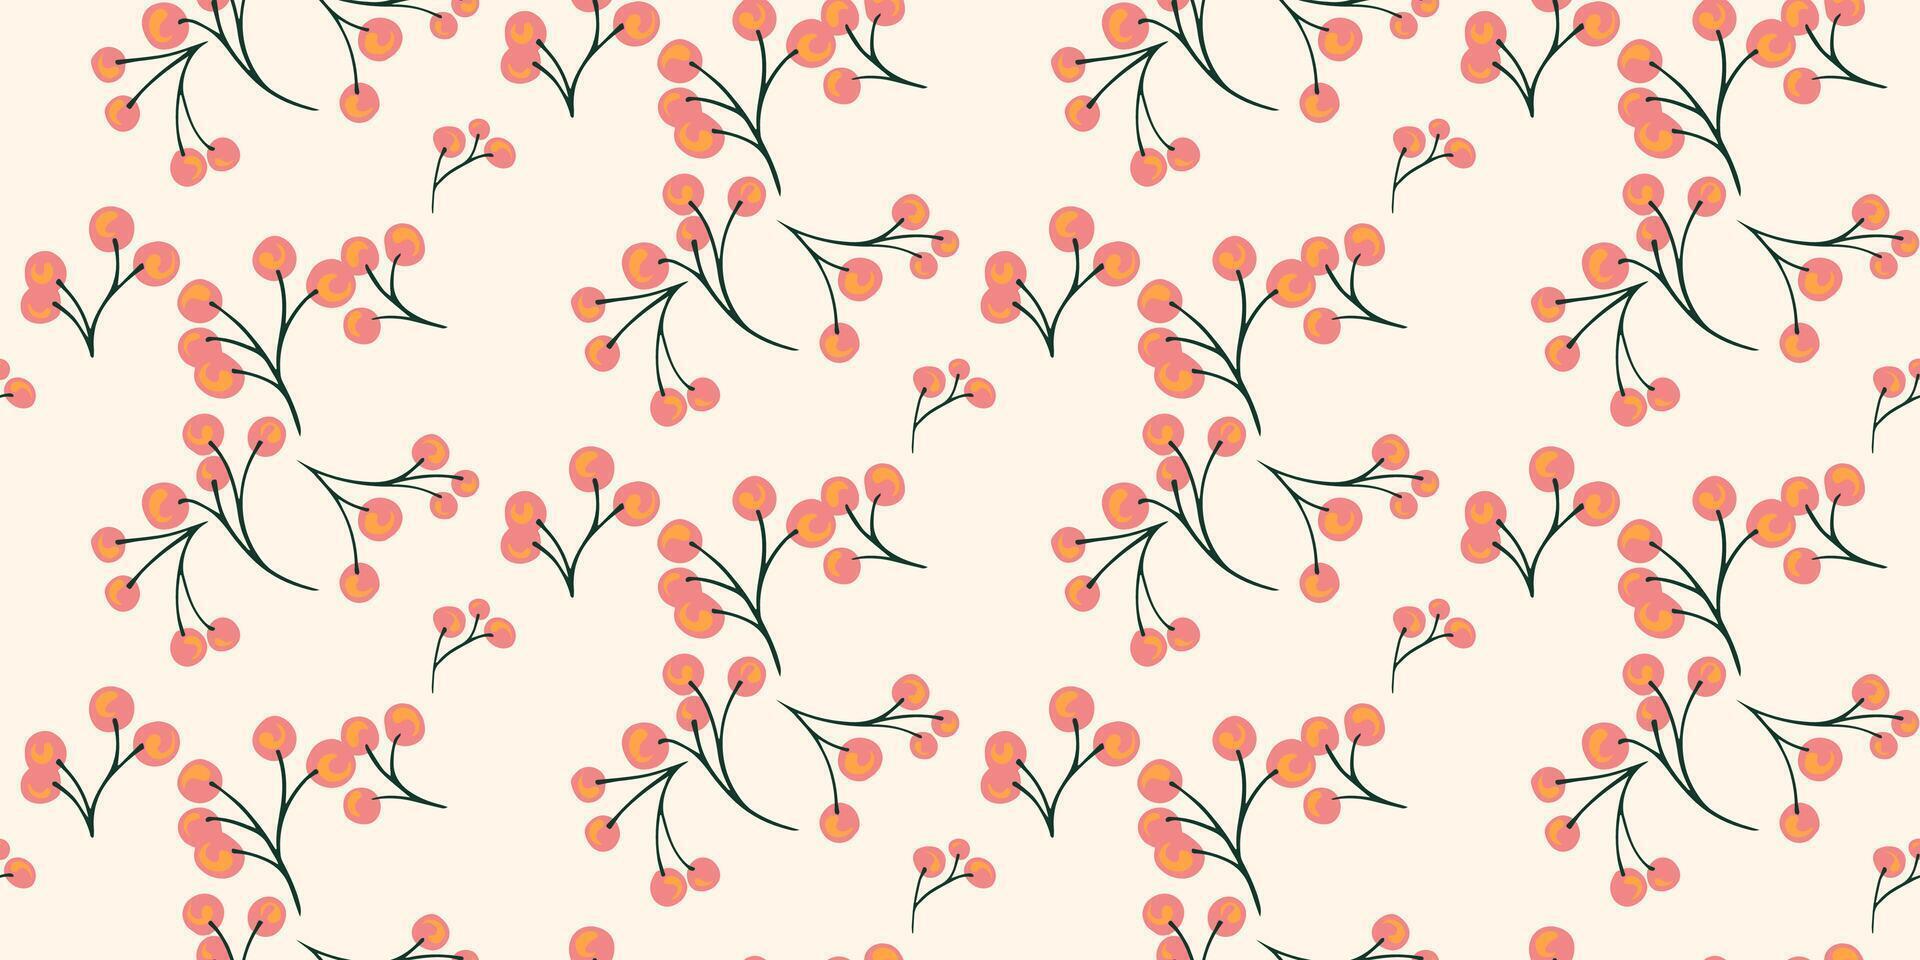 Abstract tiny branches with shapes berries dots, drops seamless pattern on a light background. Stylized simple juniper, boxwood, viburnum, barberry patterned. Vector hand drawn sketch.